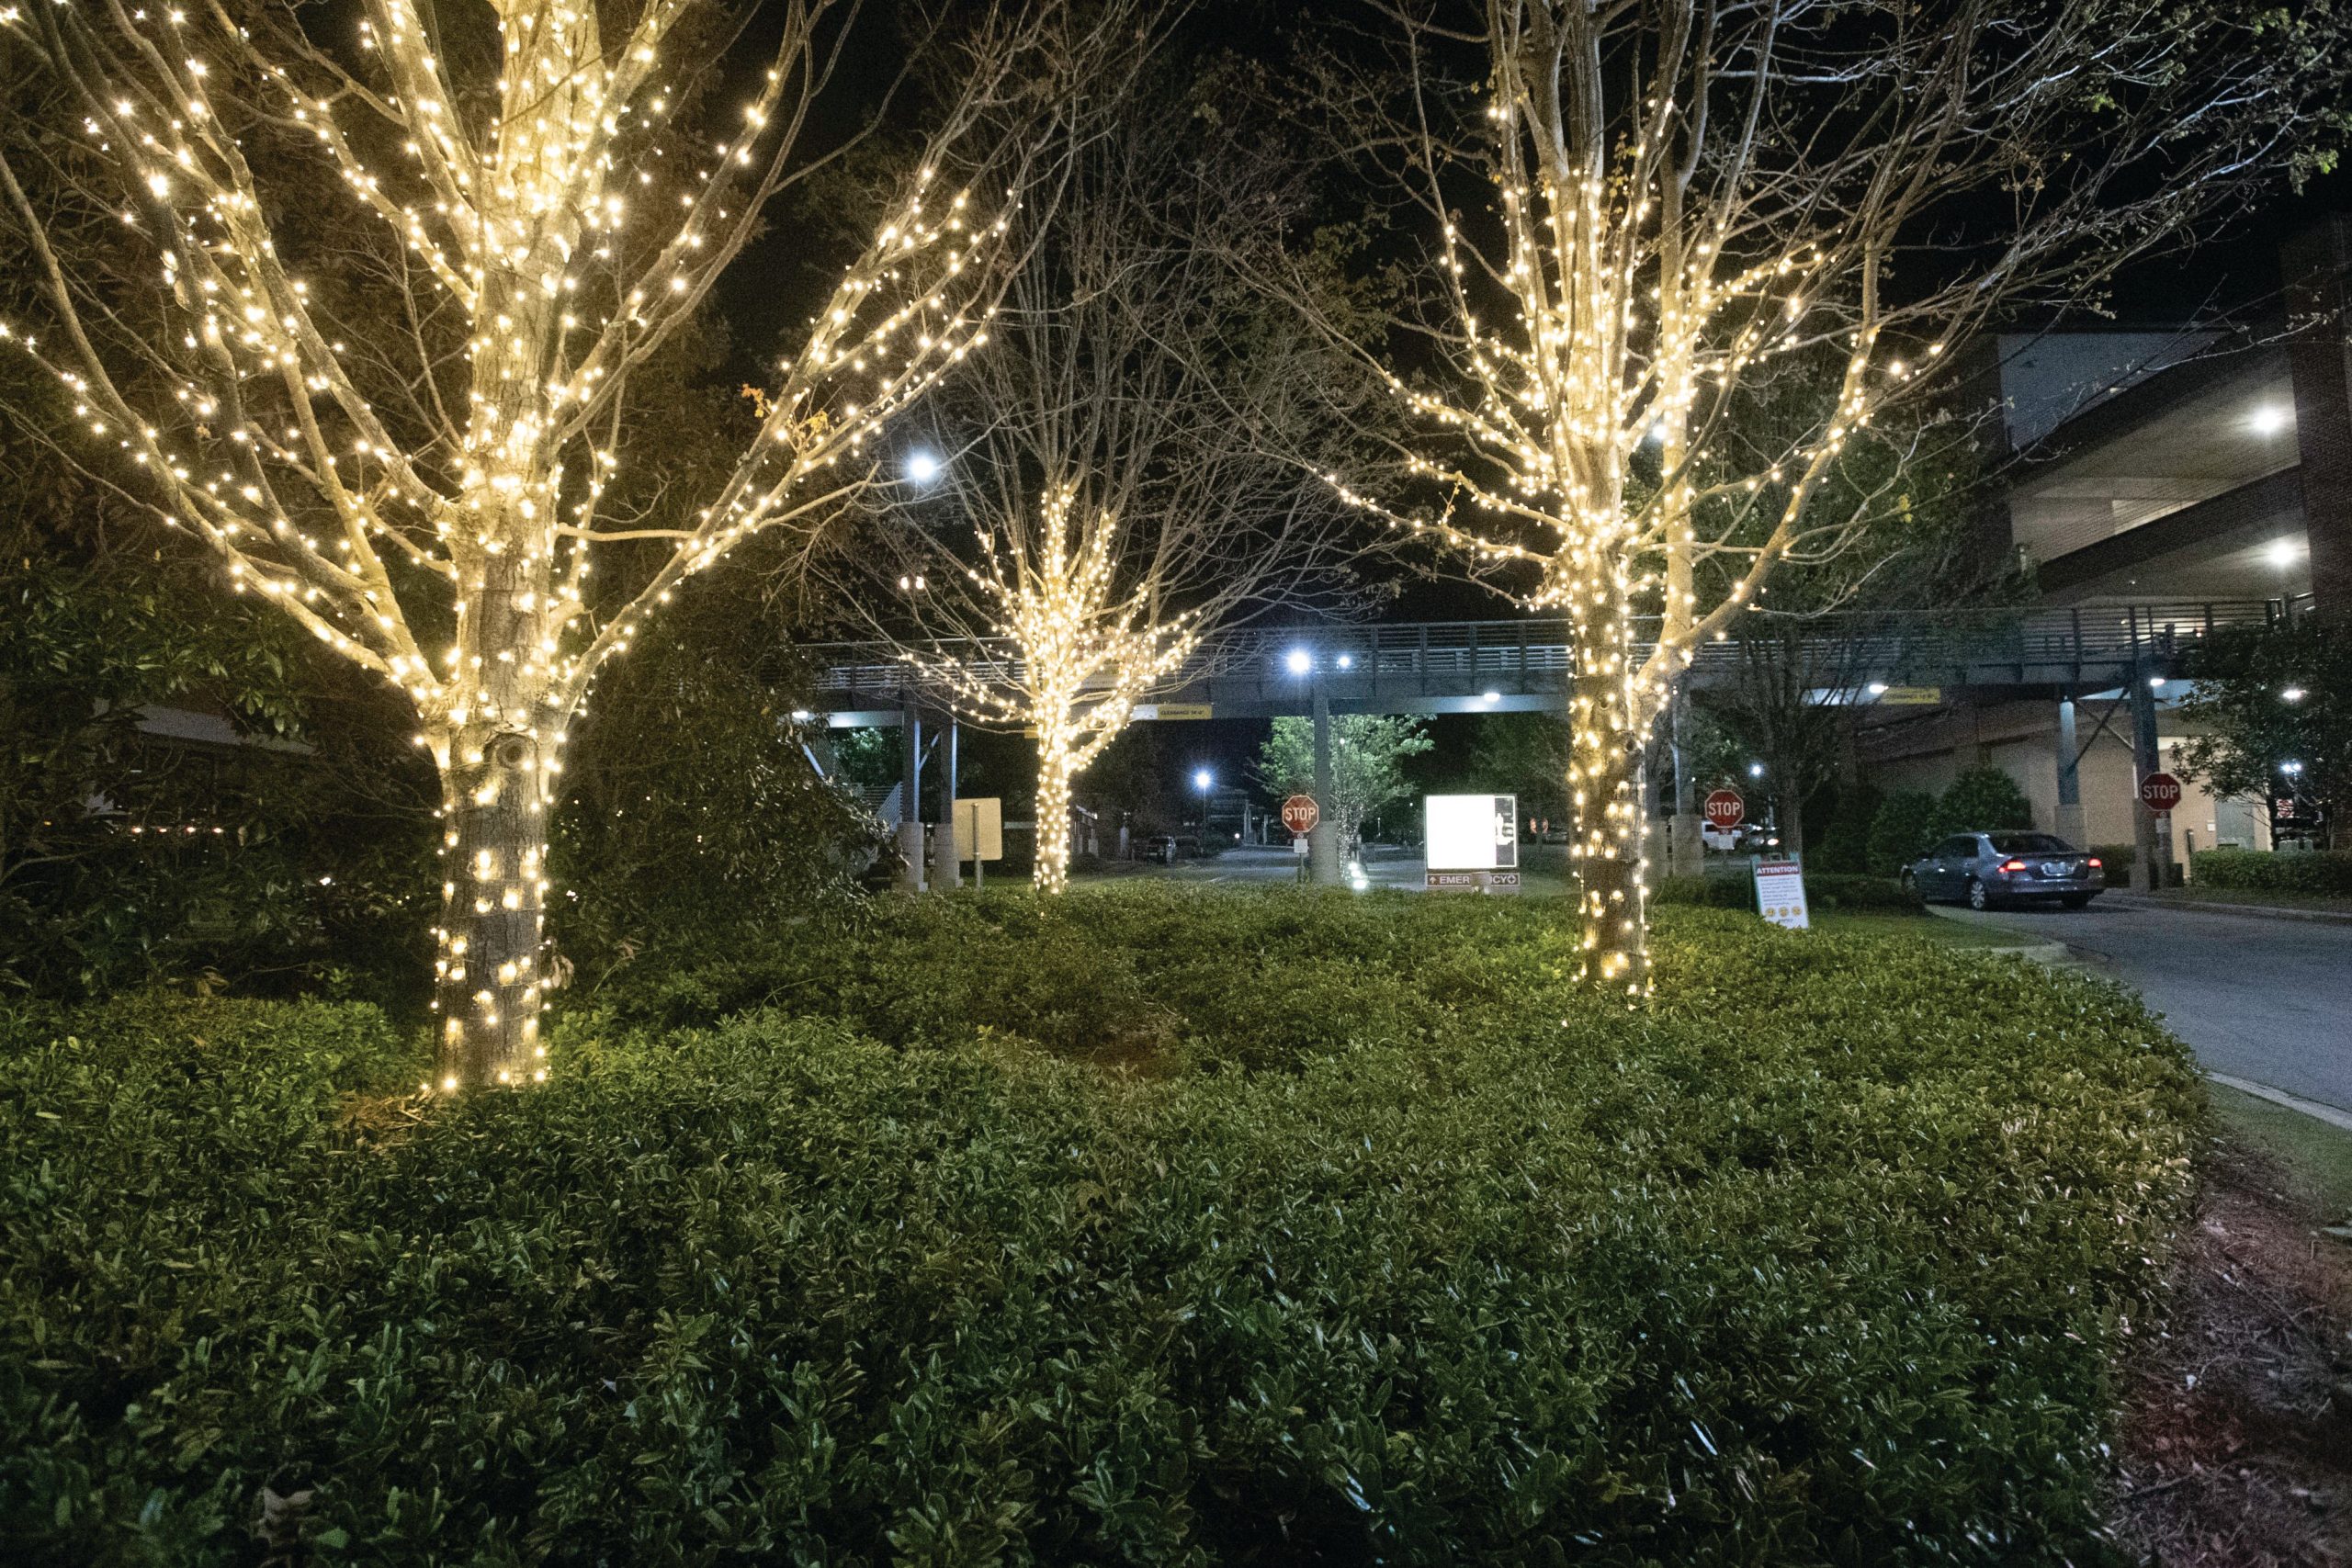 Local outdoor lighting company brings ‘glow’ of hope to EAMC